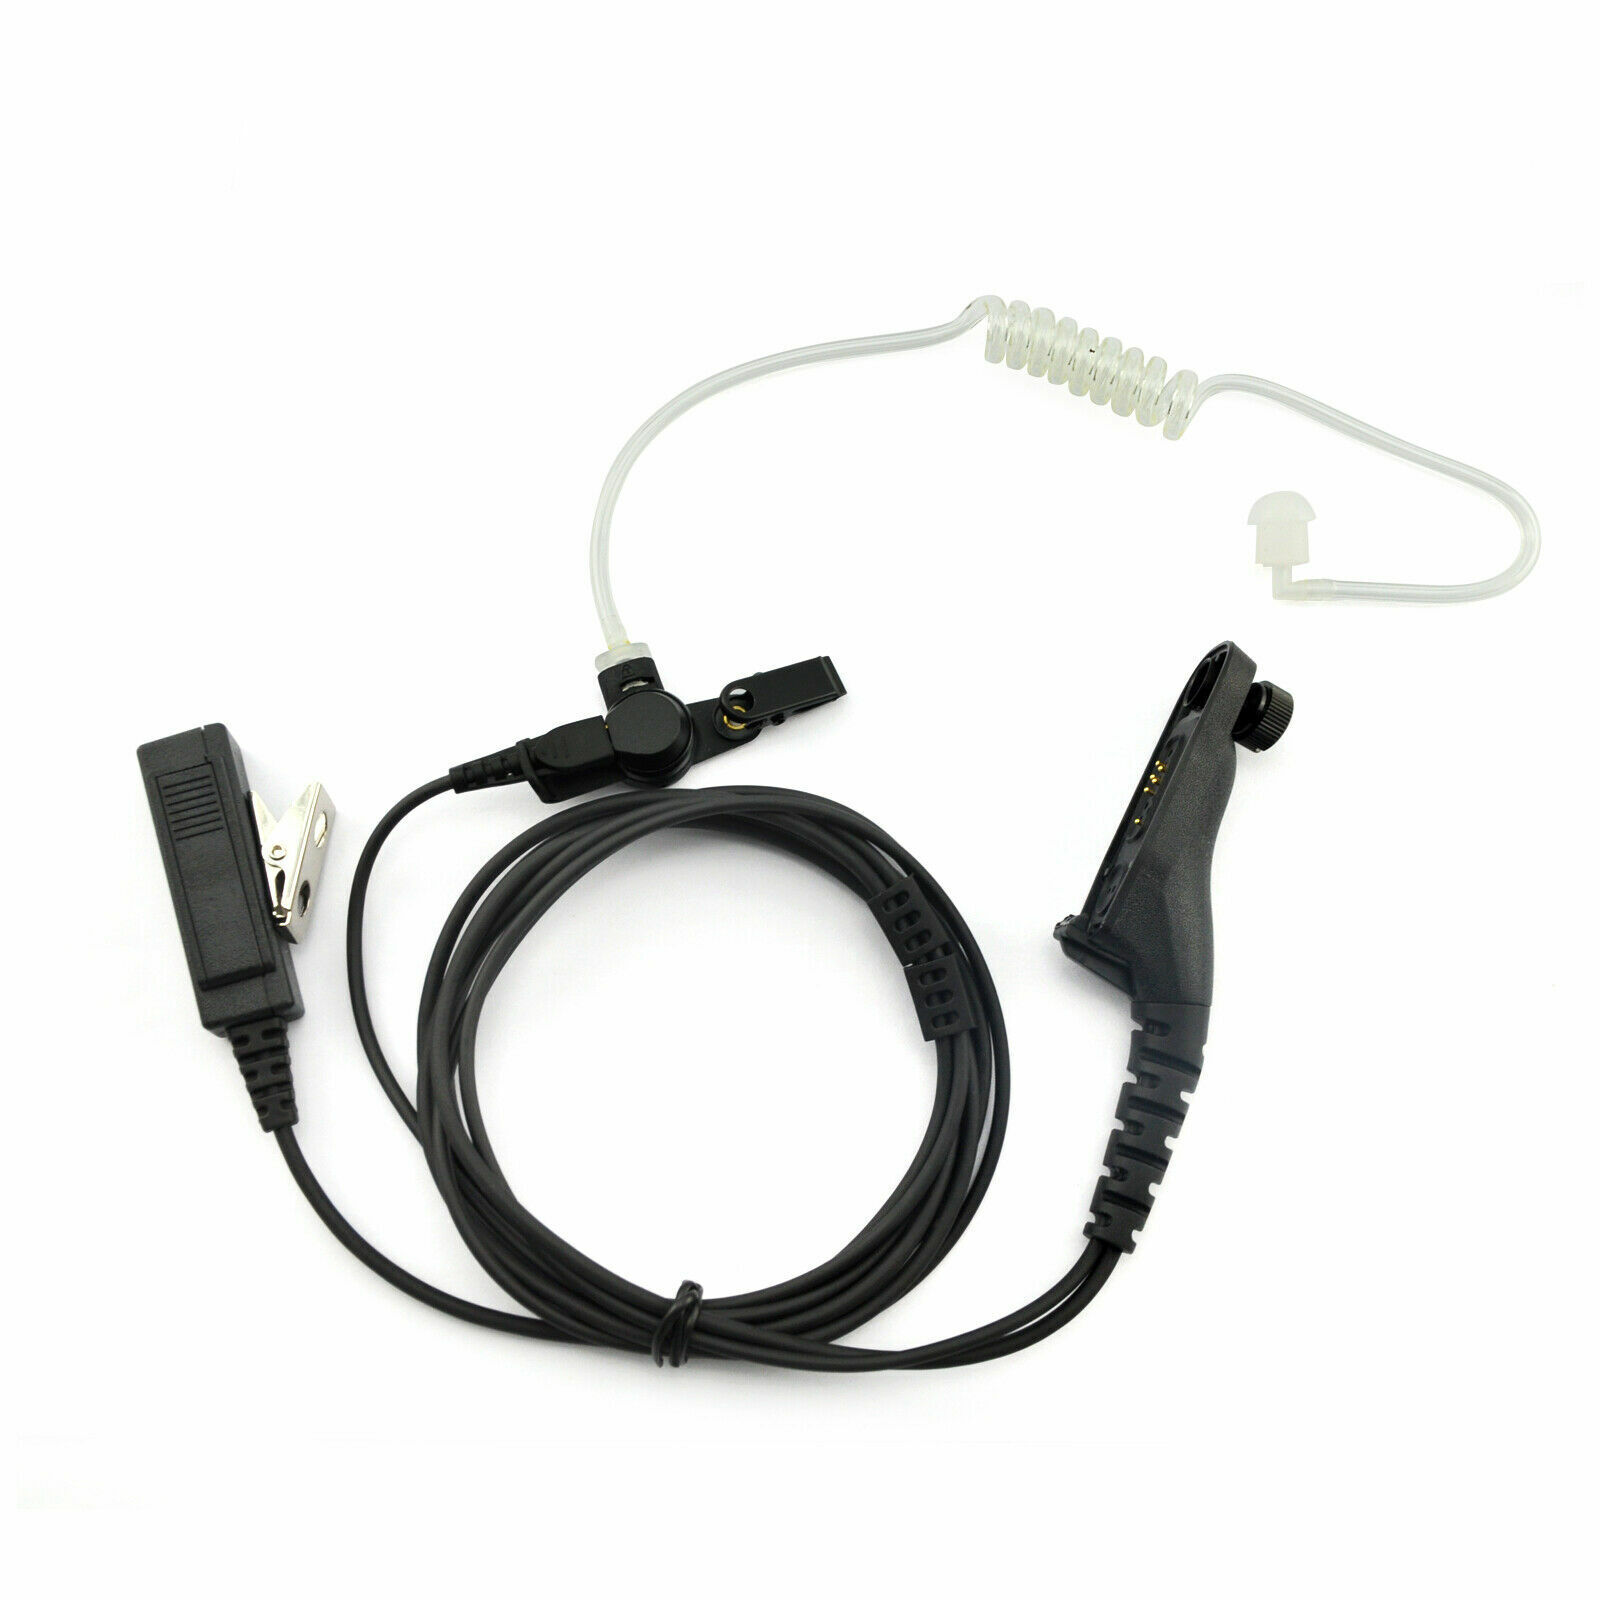 Lot 2-Wire Acoustic Tube PTT Earpiece for Motorola Radios APX900 XPR7550e MTP850